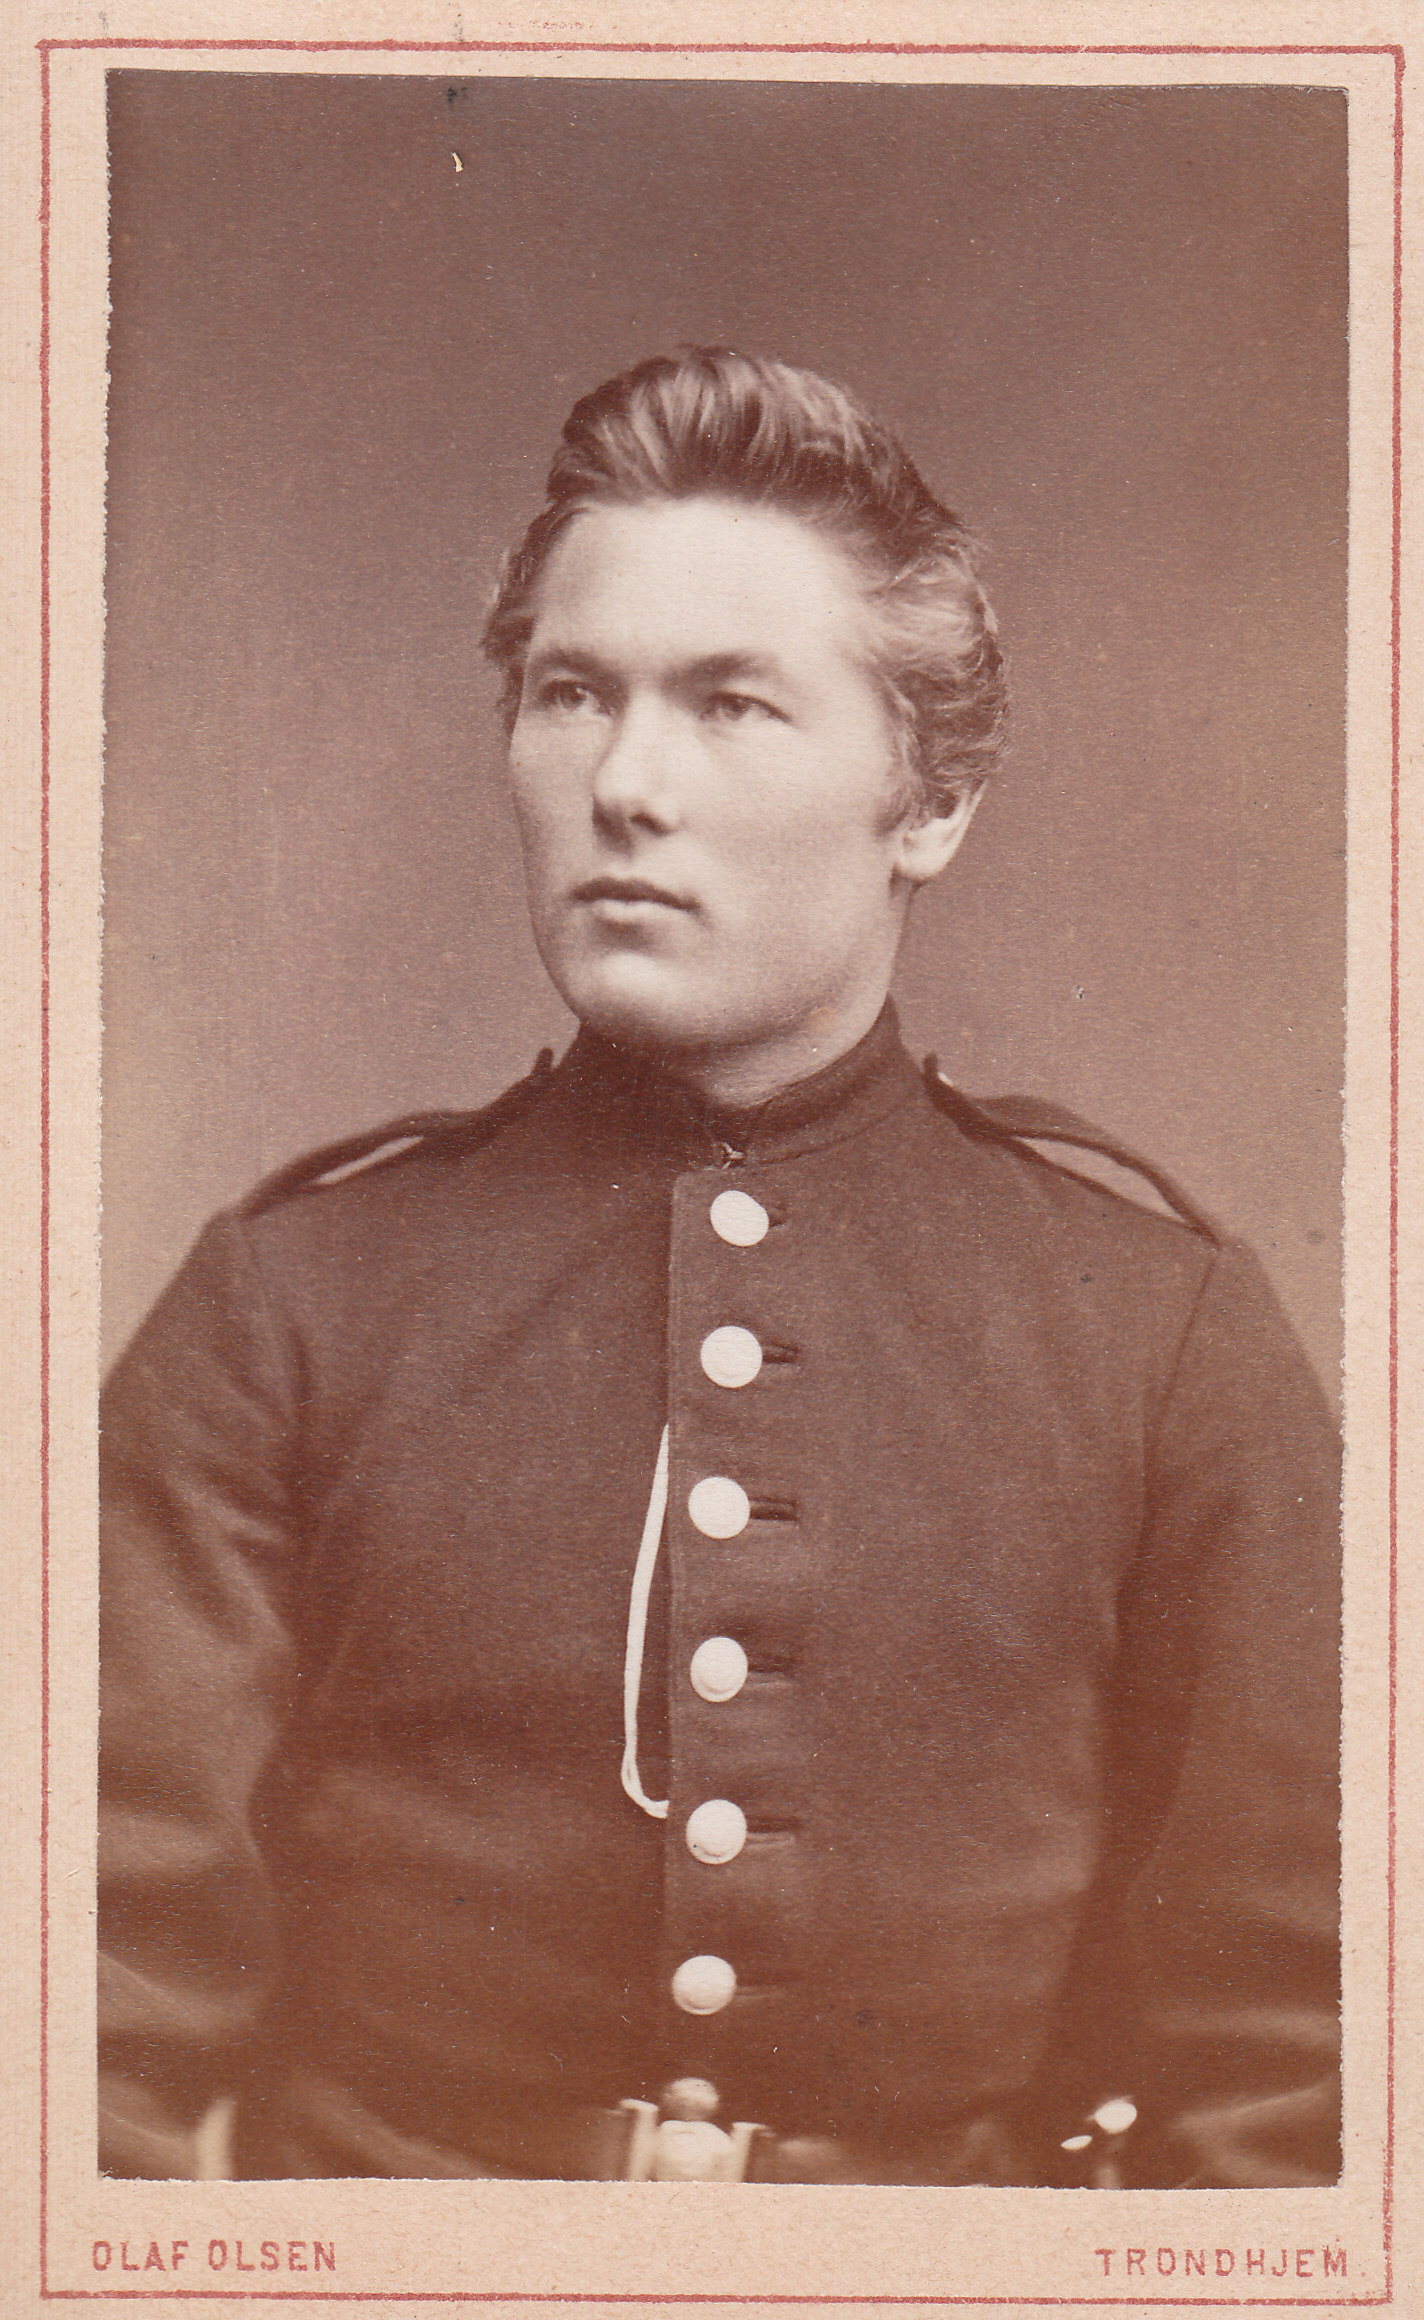 an old po shows a man in a uniform